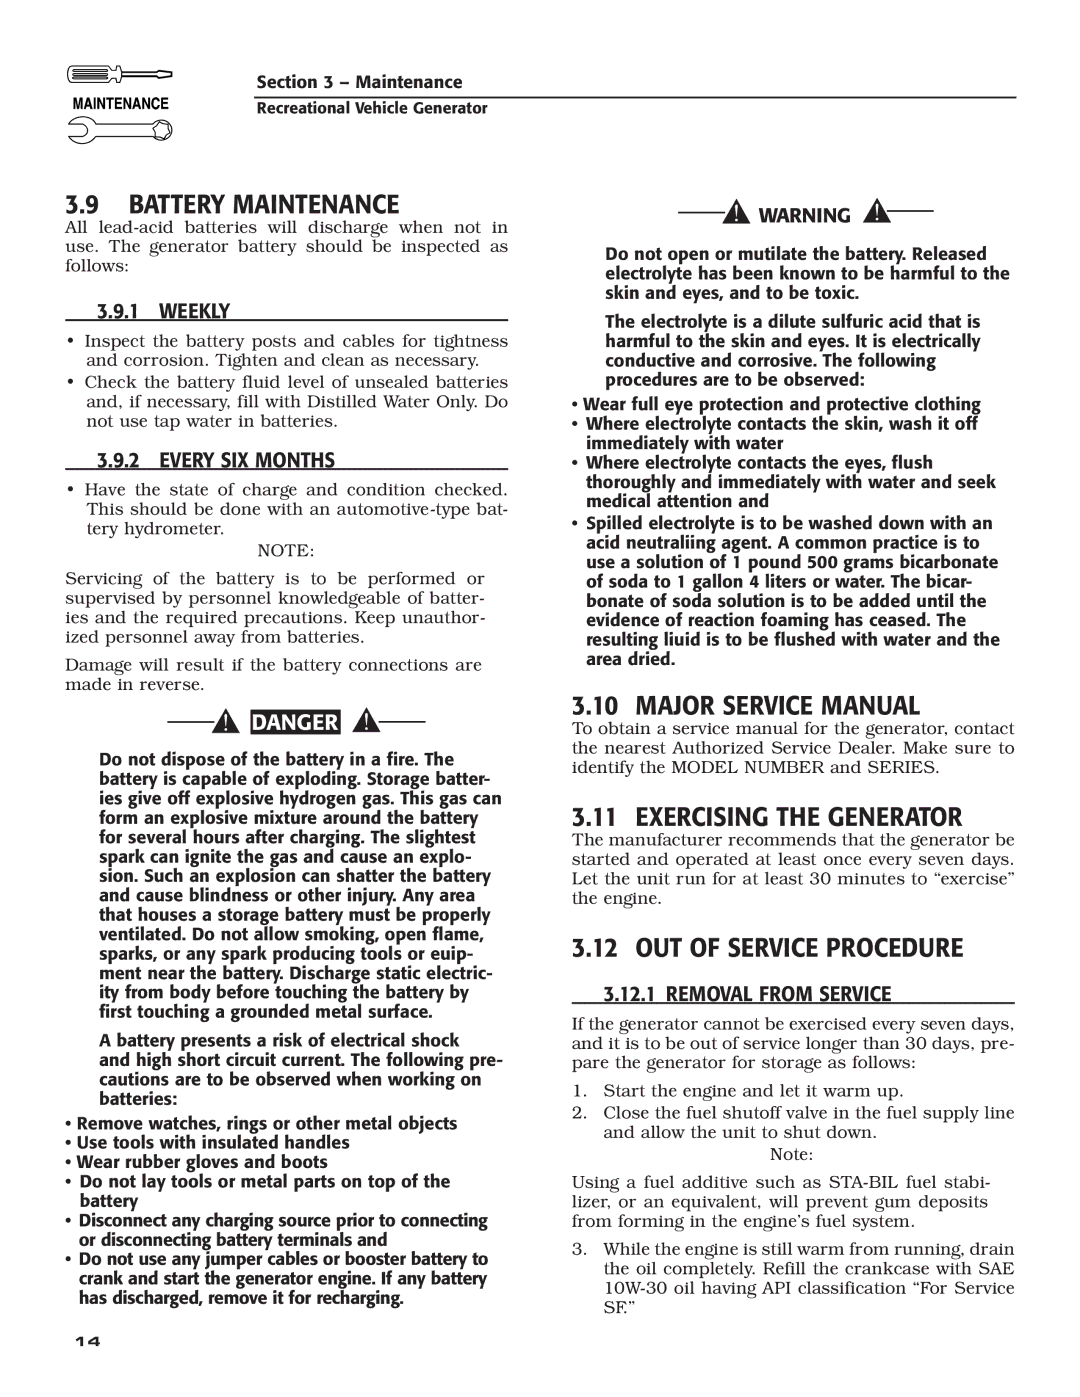 Generac Power Systems 004709-0 owner manual Battery Maintenance, Exercising the Generator, OUT of Service Procedure 